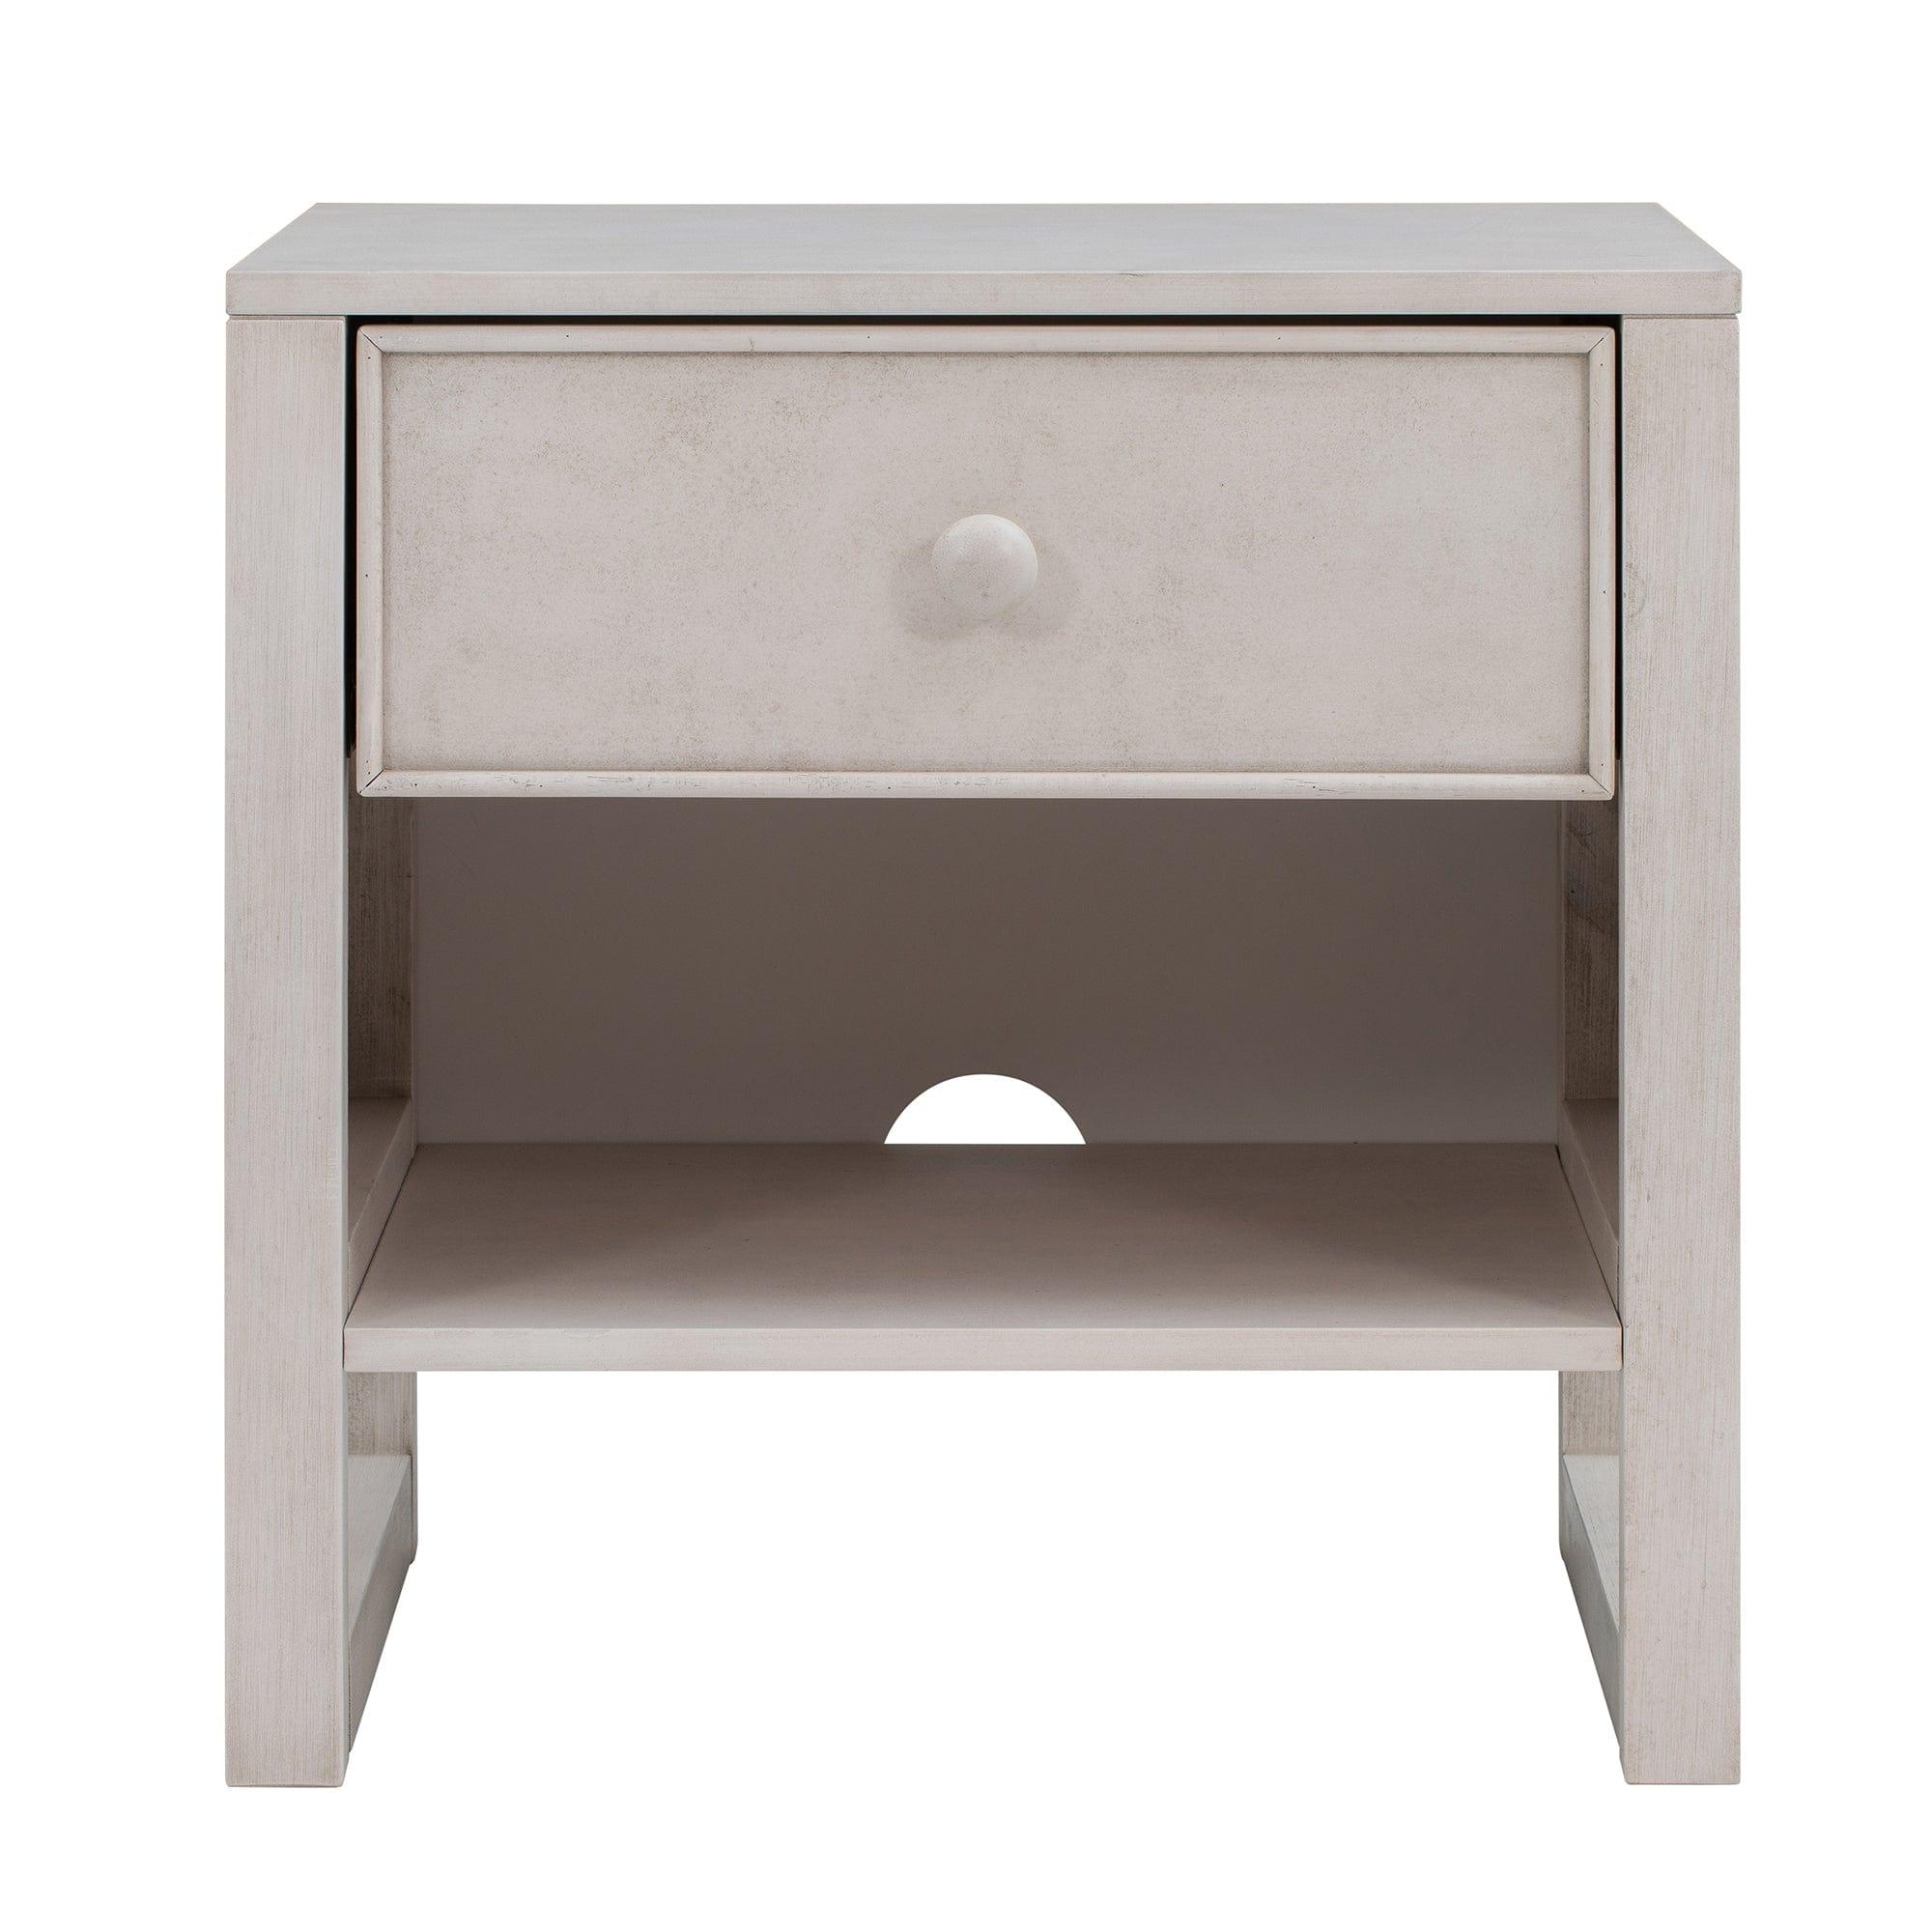 Shop Wooden Nightstand with a Drawer and an Open Storage,End Table for Bedroom,Anitque White Mademoiselle Home Decor